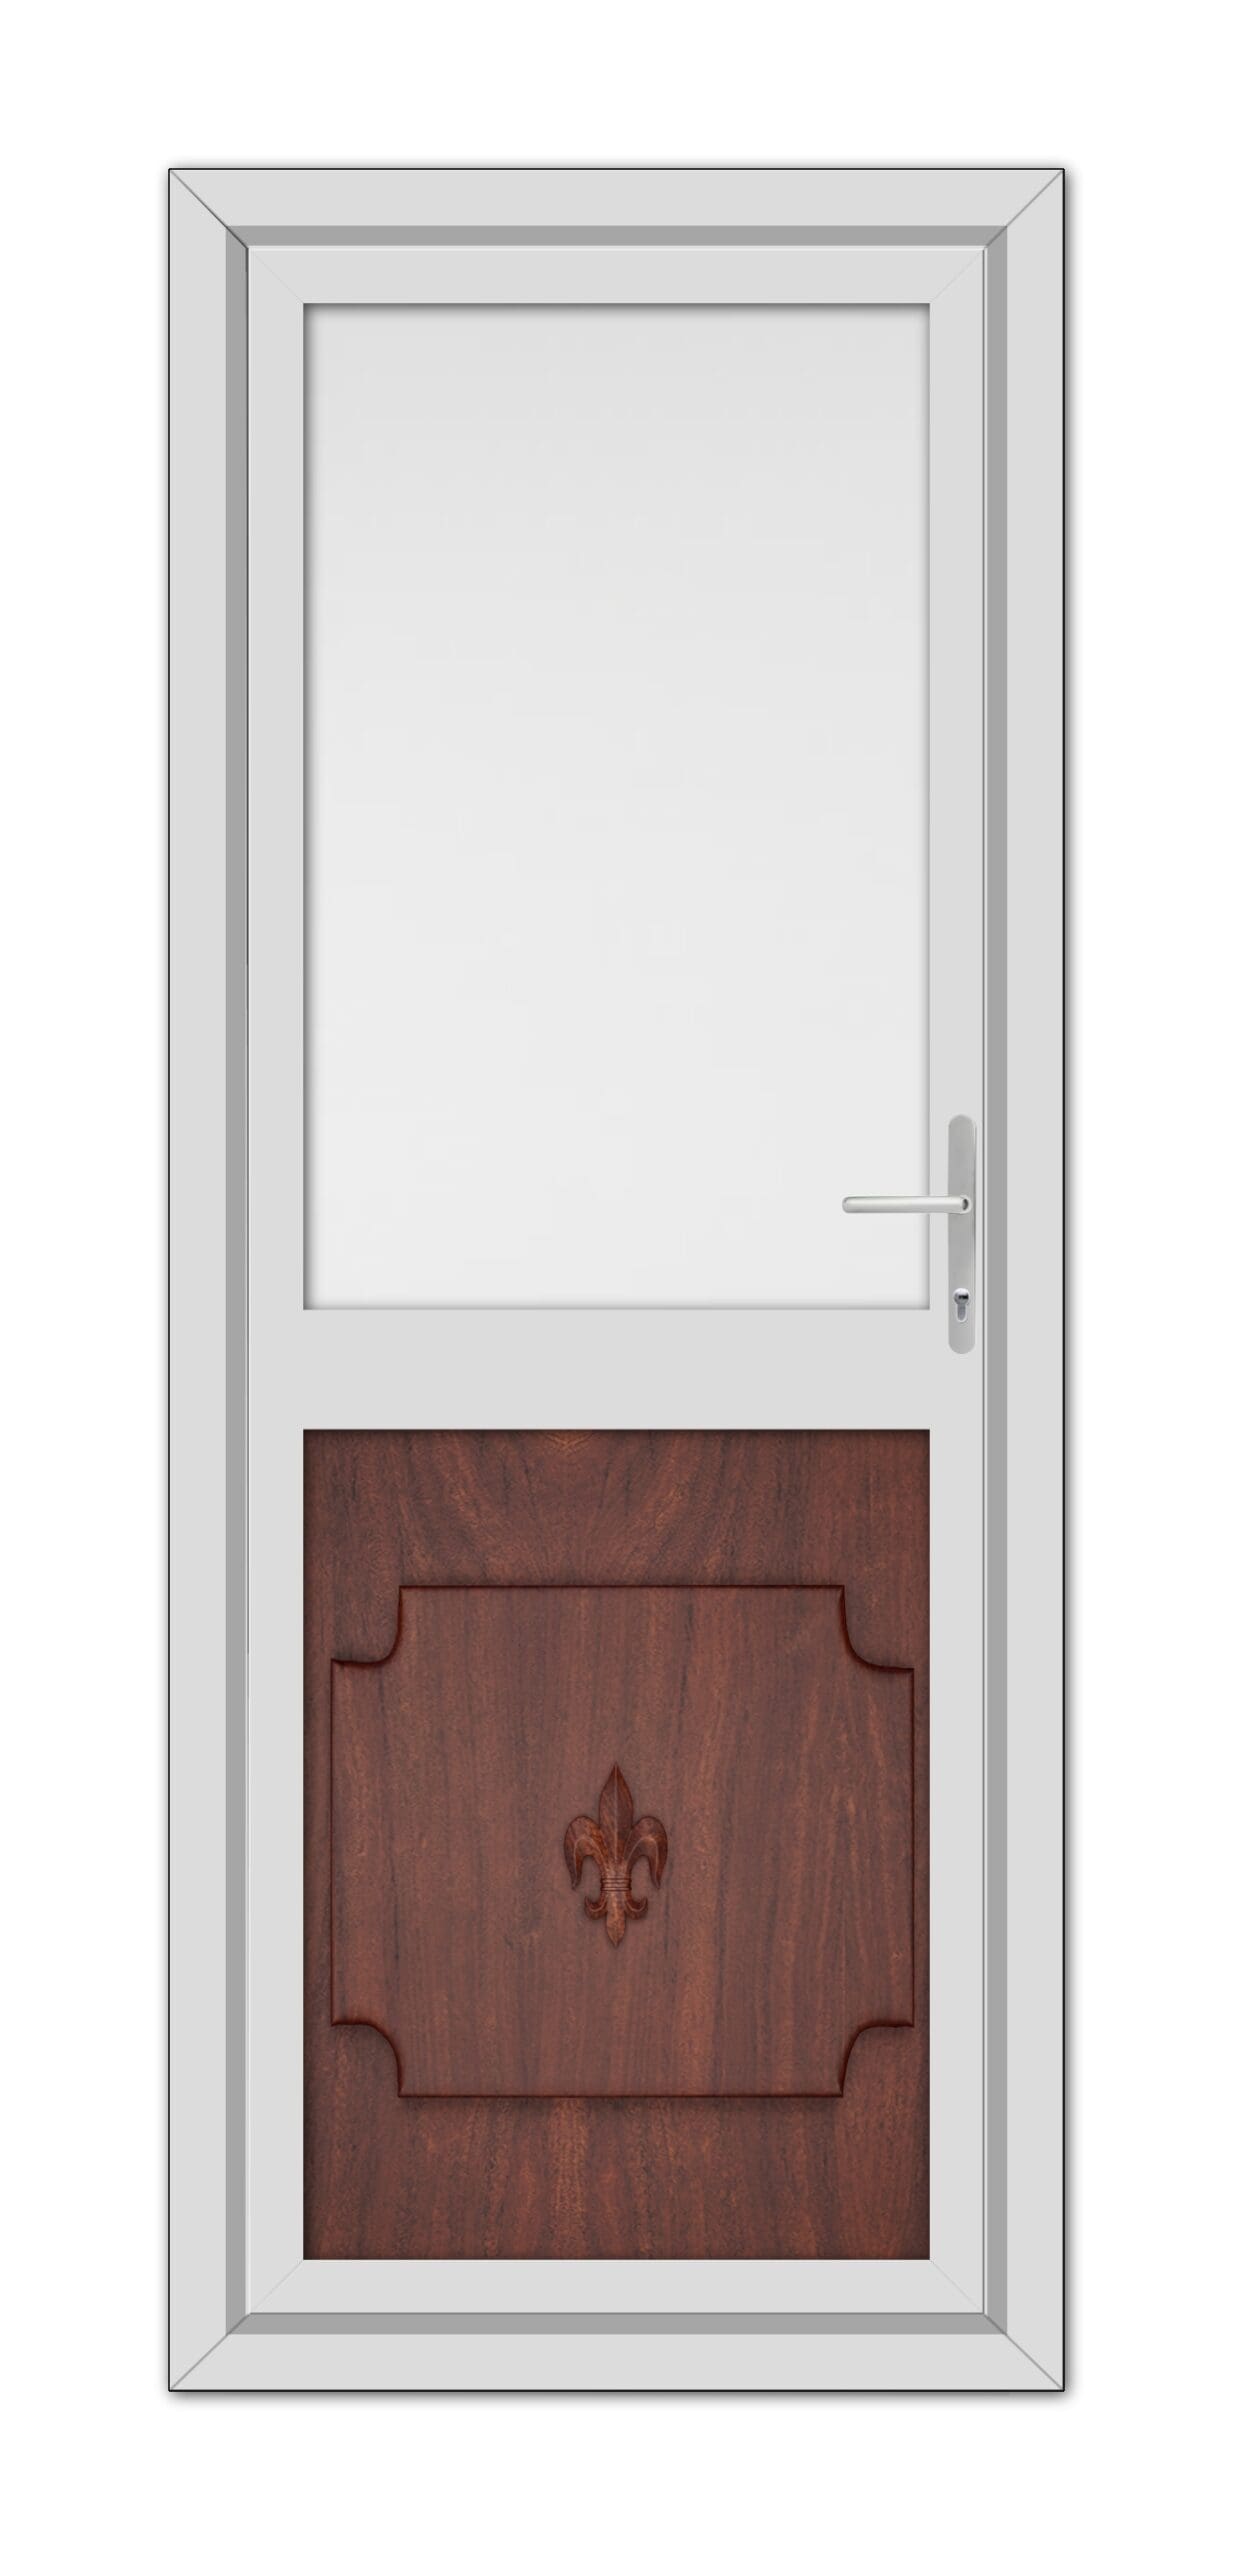 A modern Rosewood Abbey Half uPVC Back Door featuring a white frame, upper glass panel, and lower wooden panel with a decorative carving, equipped with a silver handle.